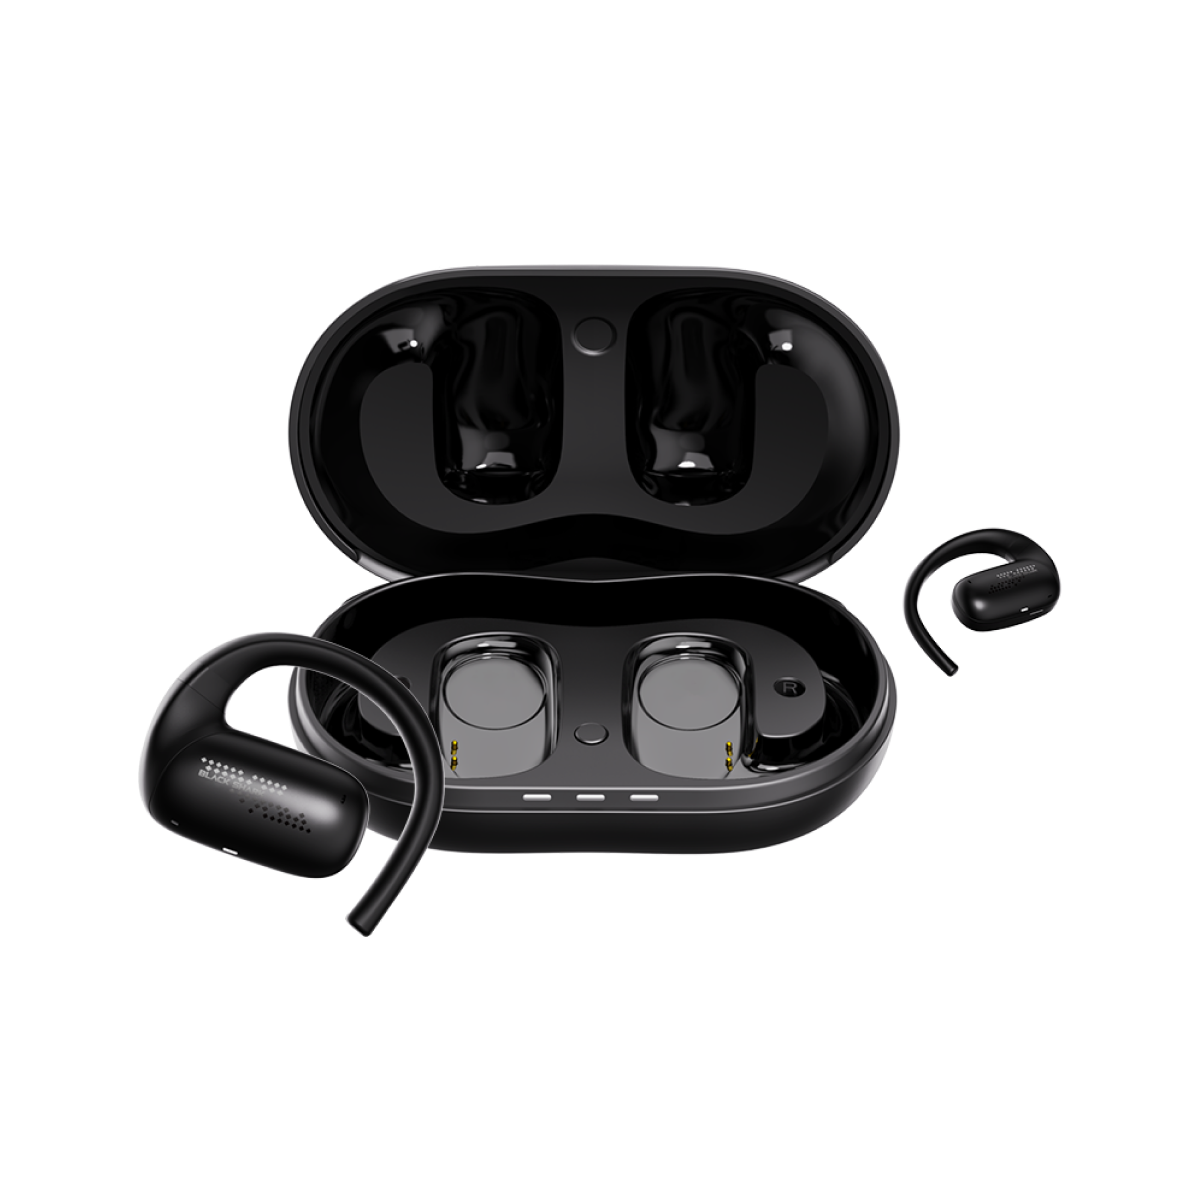  Black Shark Bluetooth Earbuds Wireless with 45ms Ultra-Low  Latency, Gaming 5.2, Dual Modes, 10mm Driver, 35H Play Time, IPX4  Waterproof, Built-in Mic - Lucifer T1 : Electronics